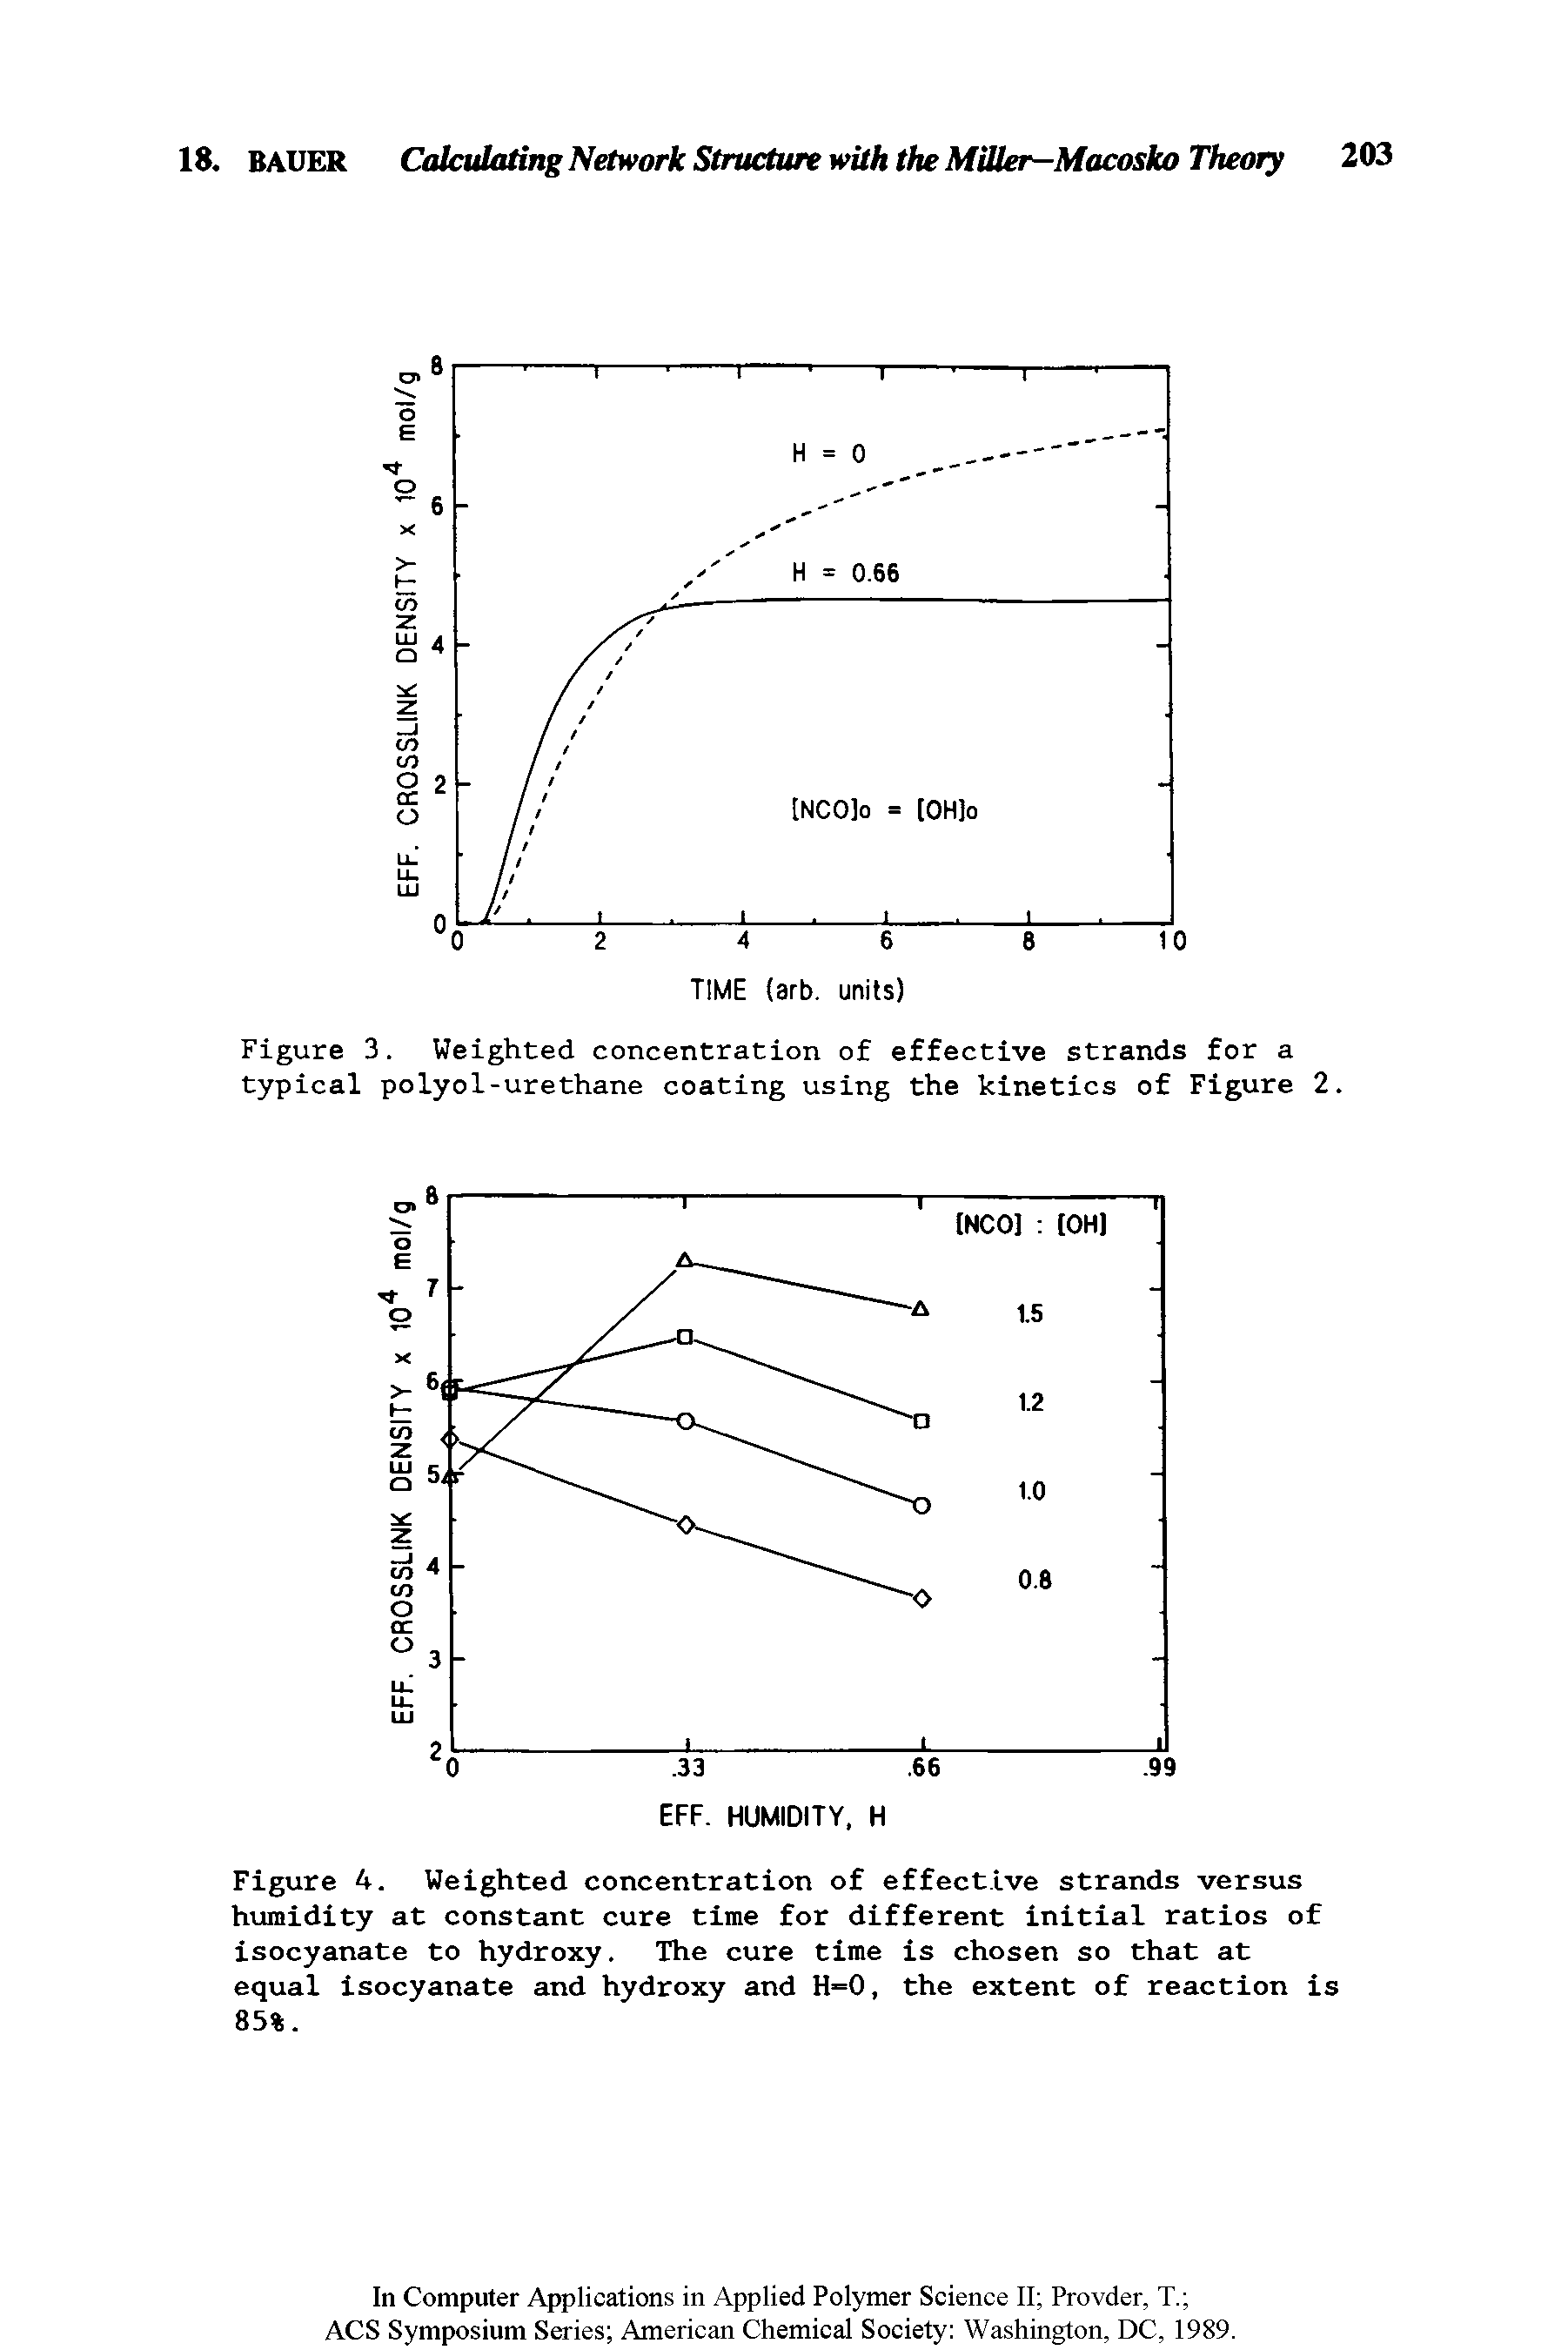 Figure 3. Weighted concentration of effective strands for a typical polyol-urethane coating using the kinetics of Figure 2.